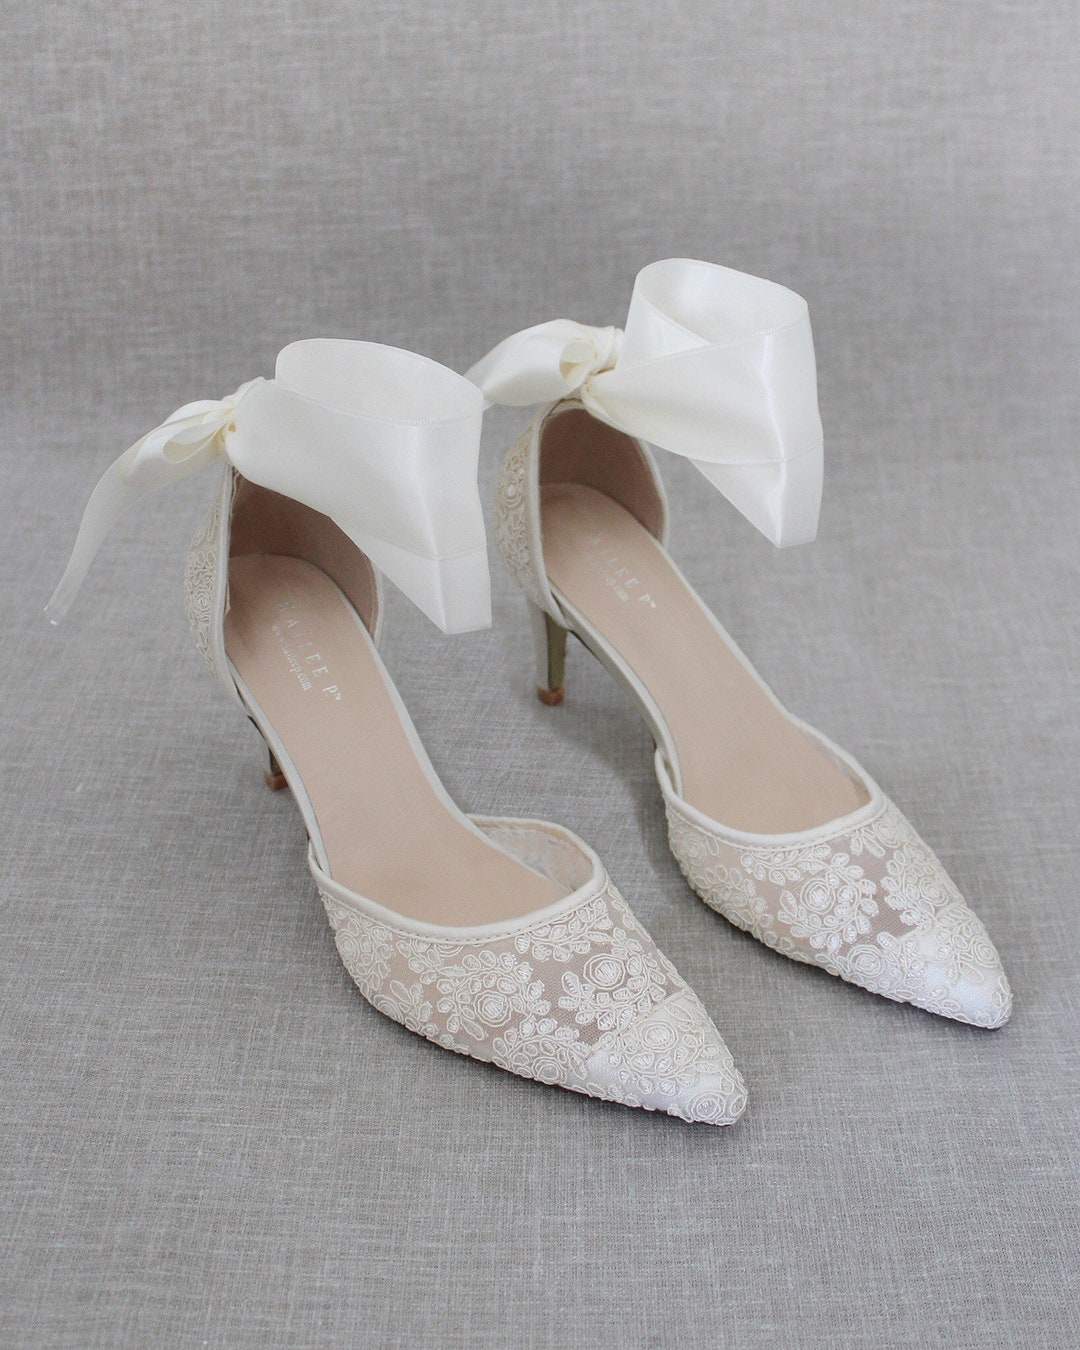 Ivory Crochet Lace Pointy Toe Heels With WRAPPED SATIN TIE, Women ...